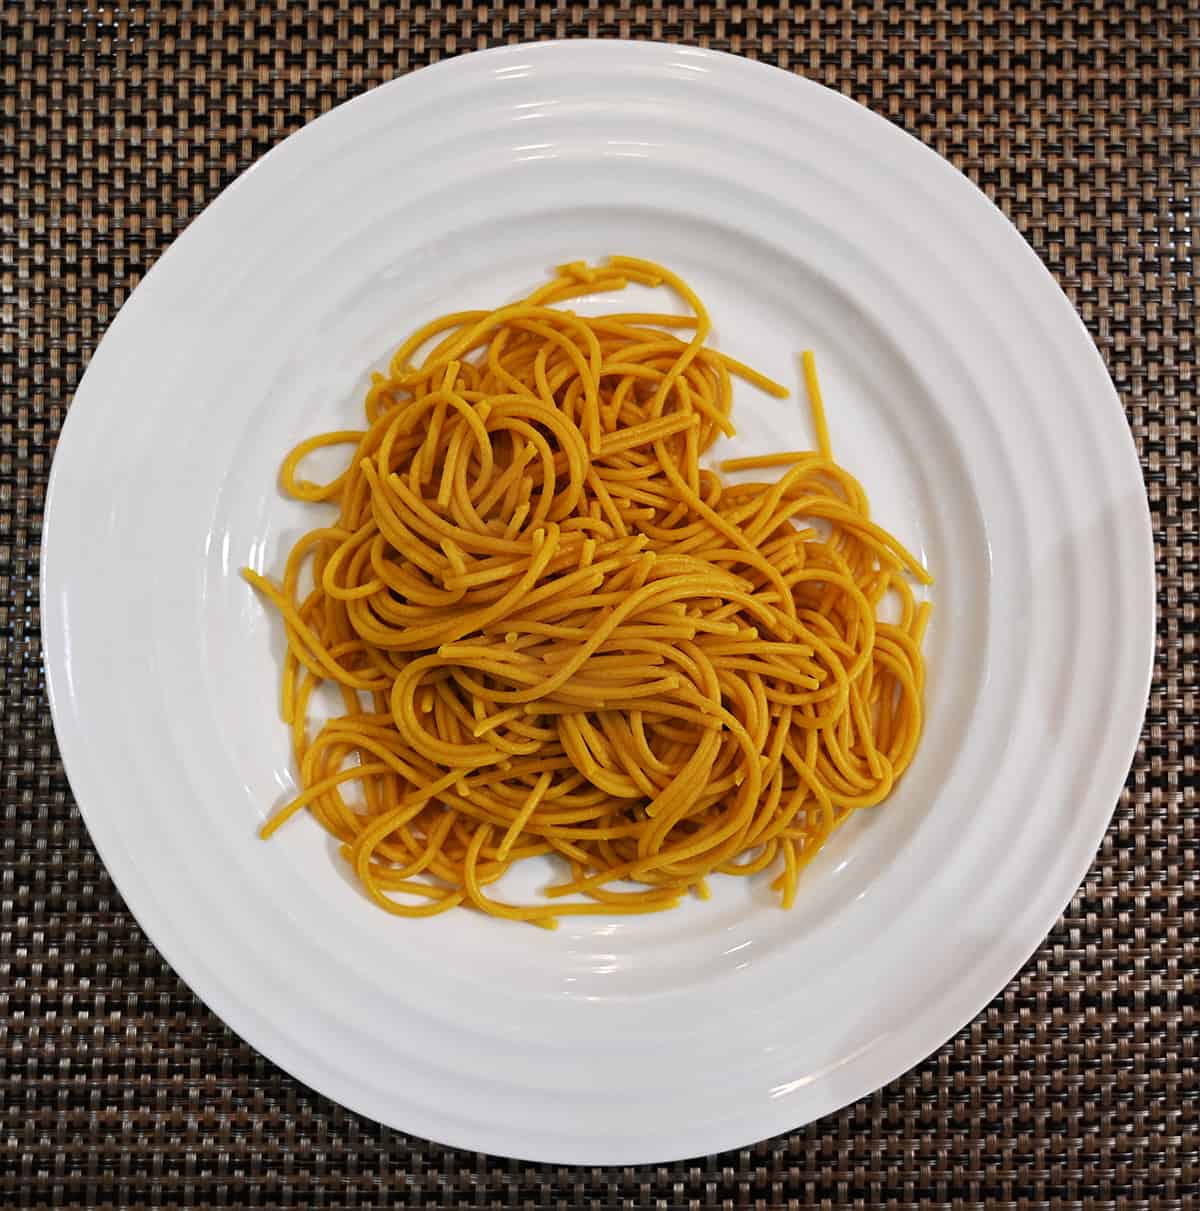 Top down image of cooked spaghetti on a white plate without any sauce on it.